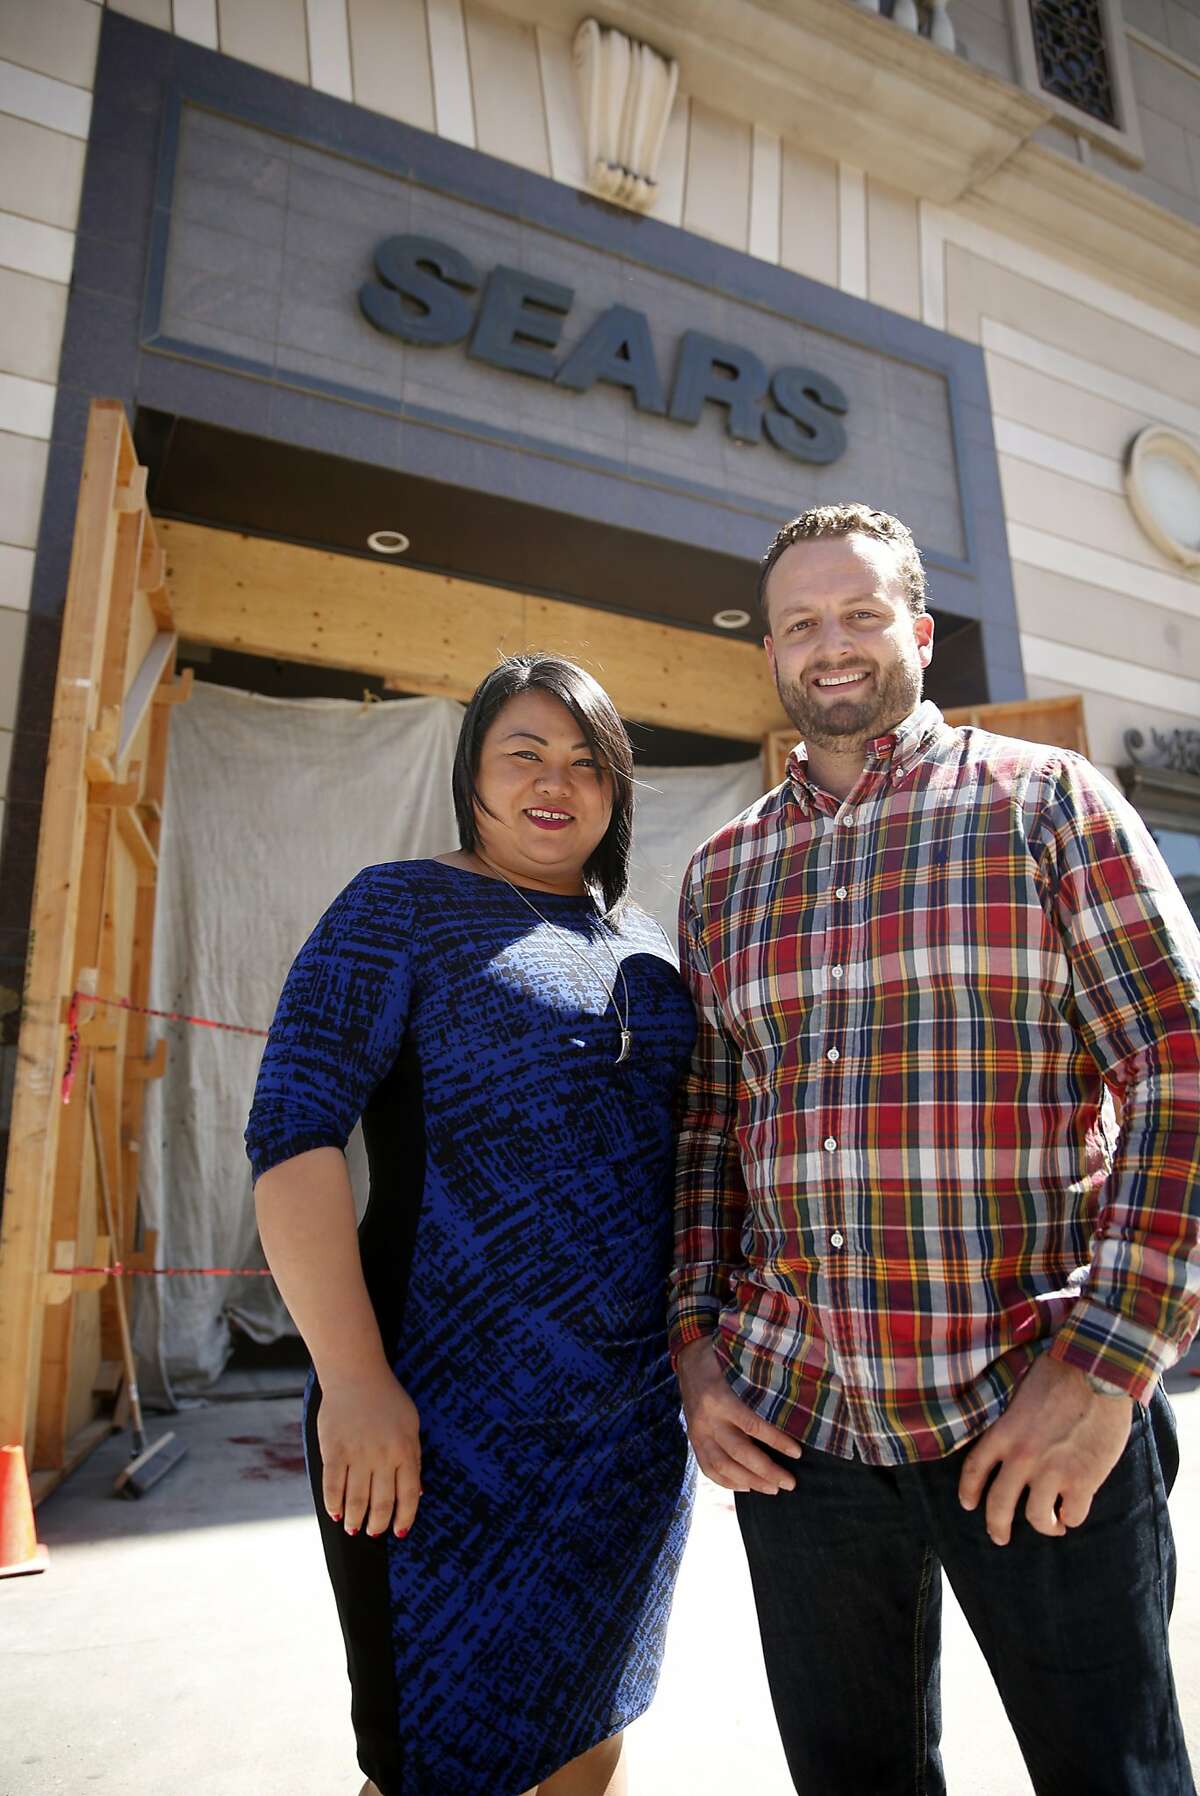 Uptown Station developers Ann Thai and Loren Goodwin in front of the historic Sears building on Telegraph Road in Oakland, Calif., on Thursday, March 26, 2015.